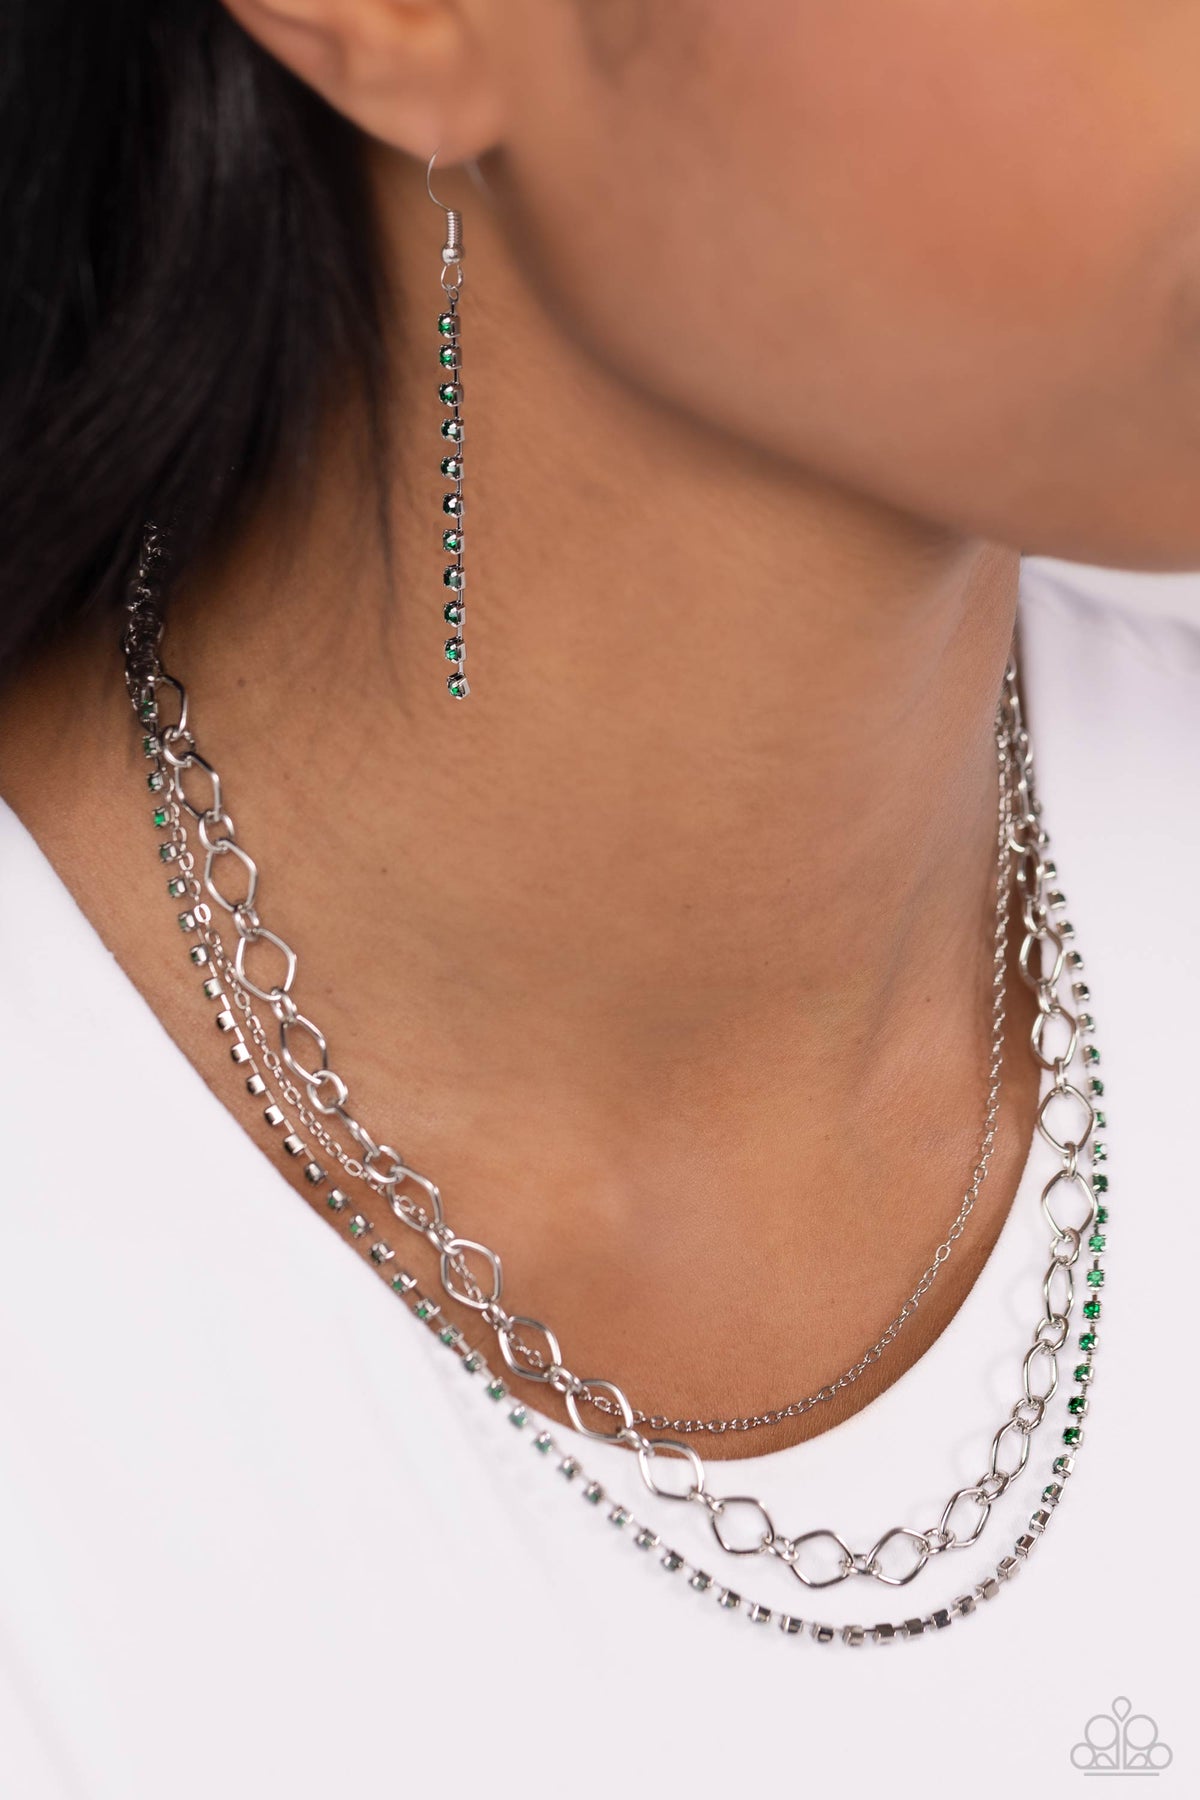 Tasteful Tiers Green Rhinestone Necklace - Paparazzi Accessories-on model - CarasShop.com - $5 Jewelry by Cara Jewels